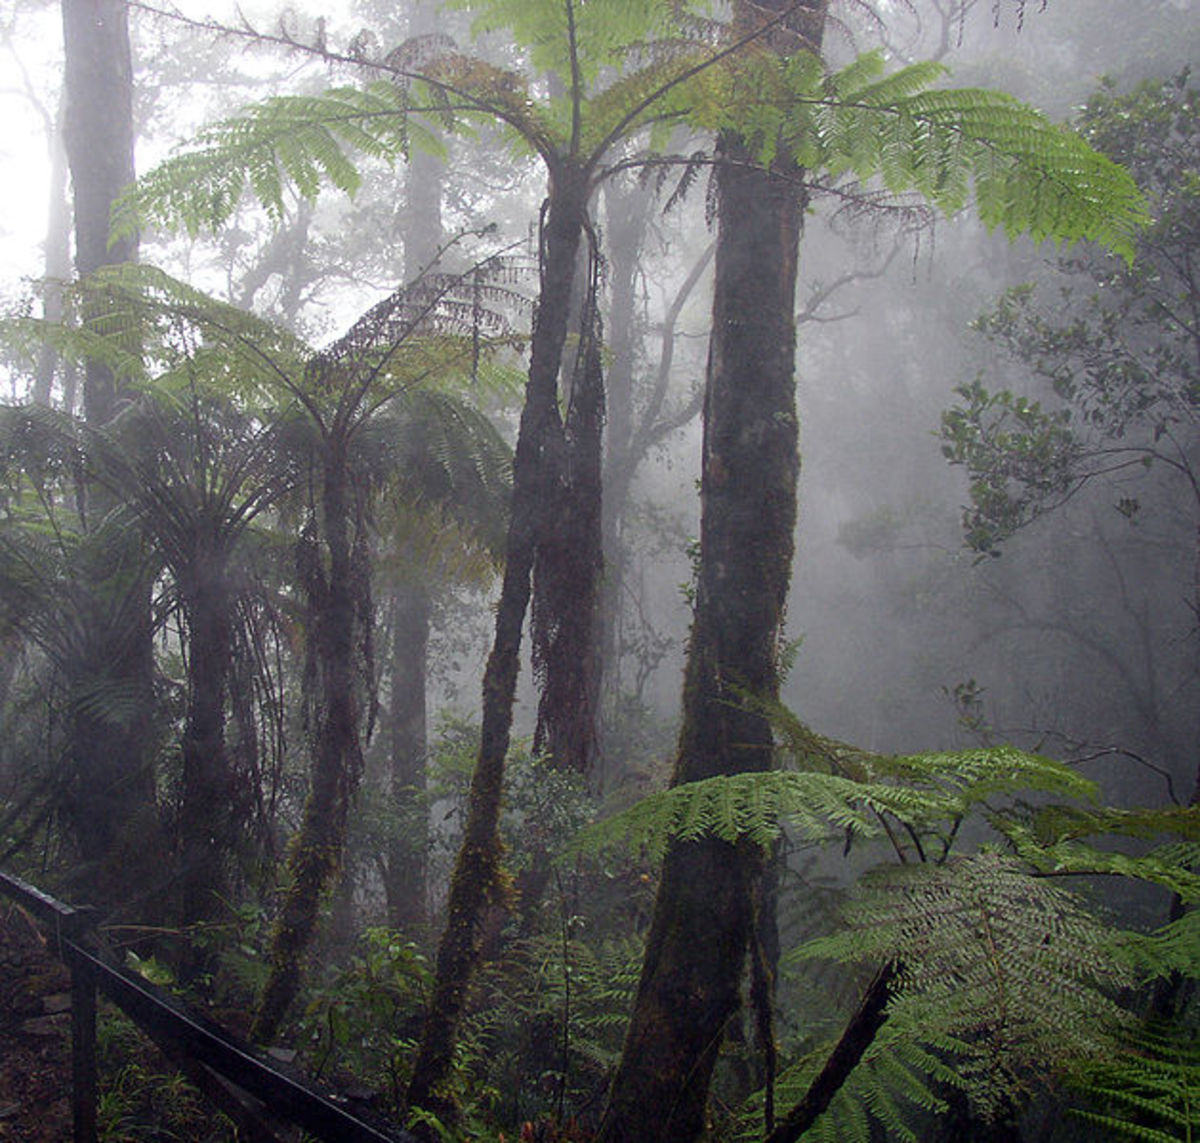 Tropical forests have high humidity